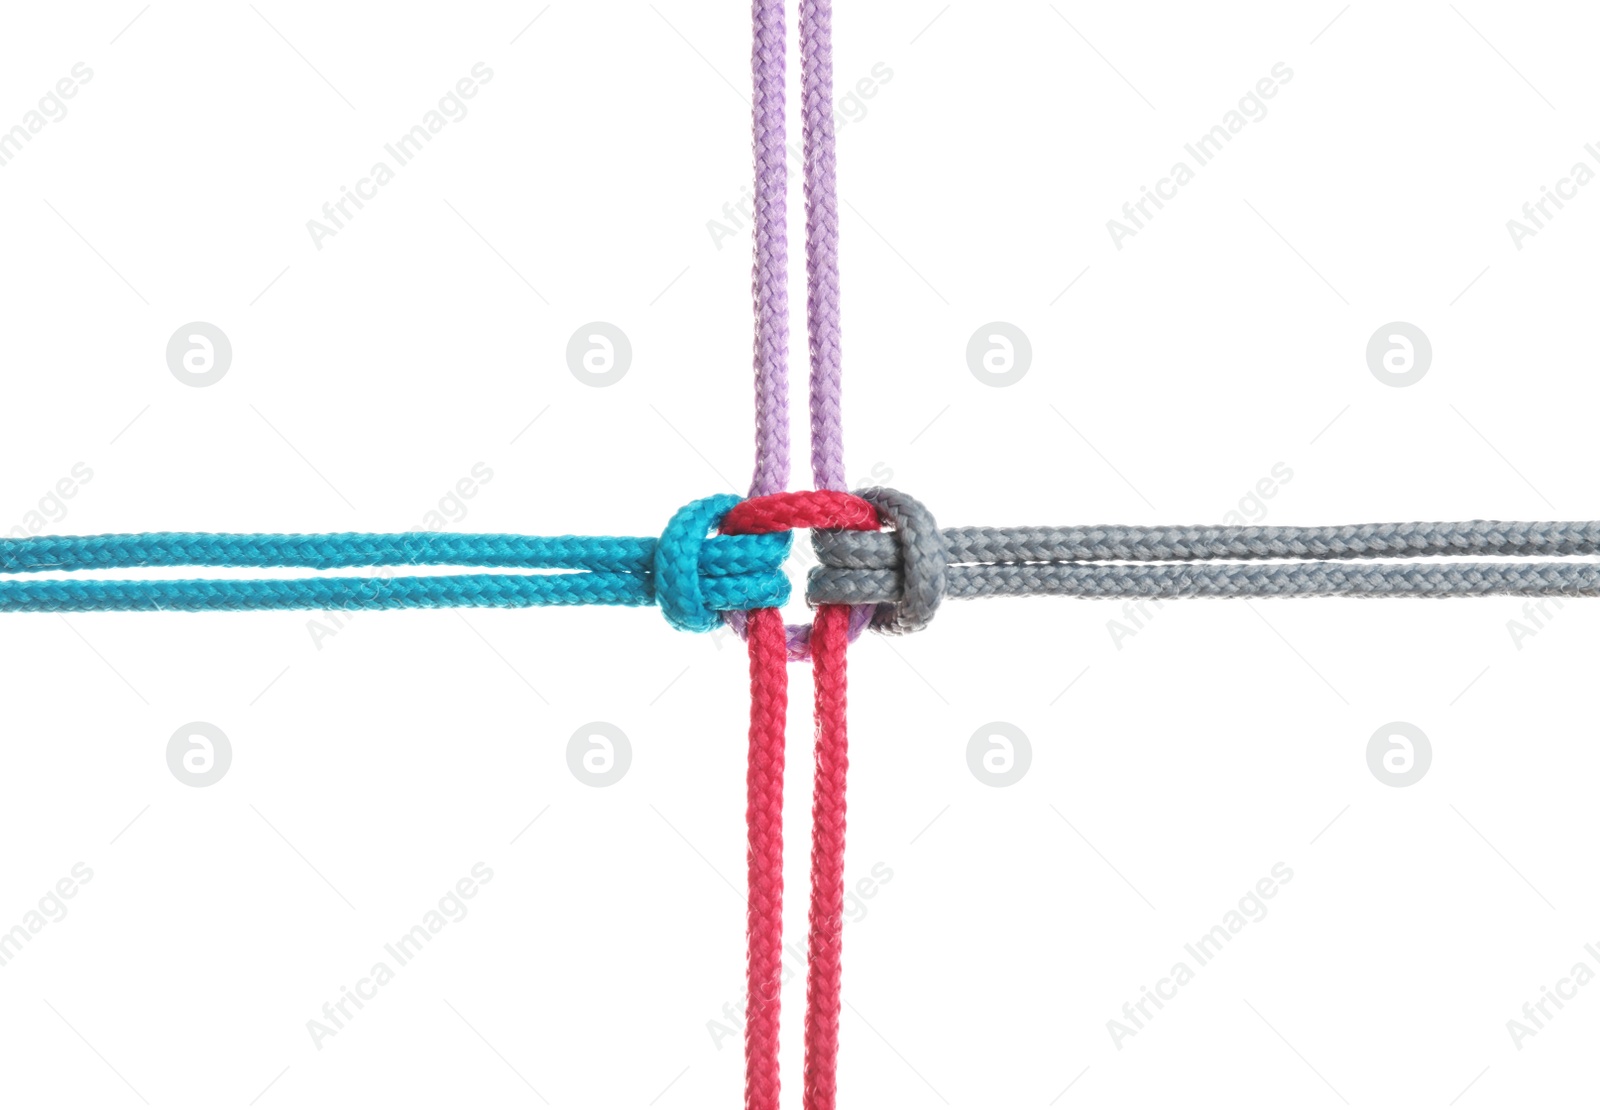 Photo of Colorful ropes tied together isolated on white. Unity concept